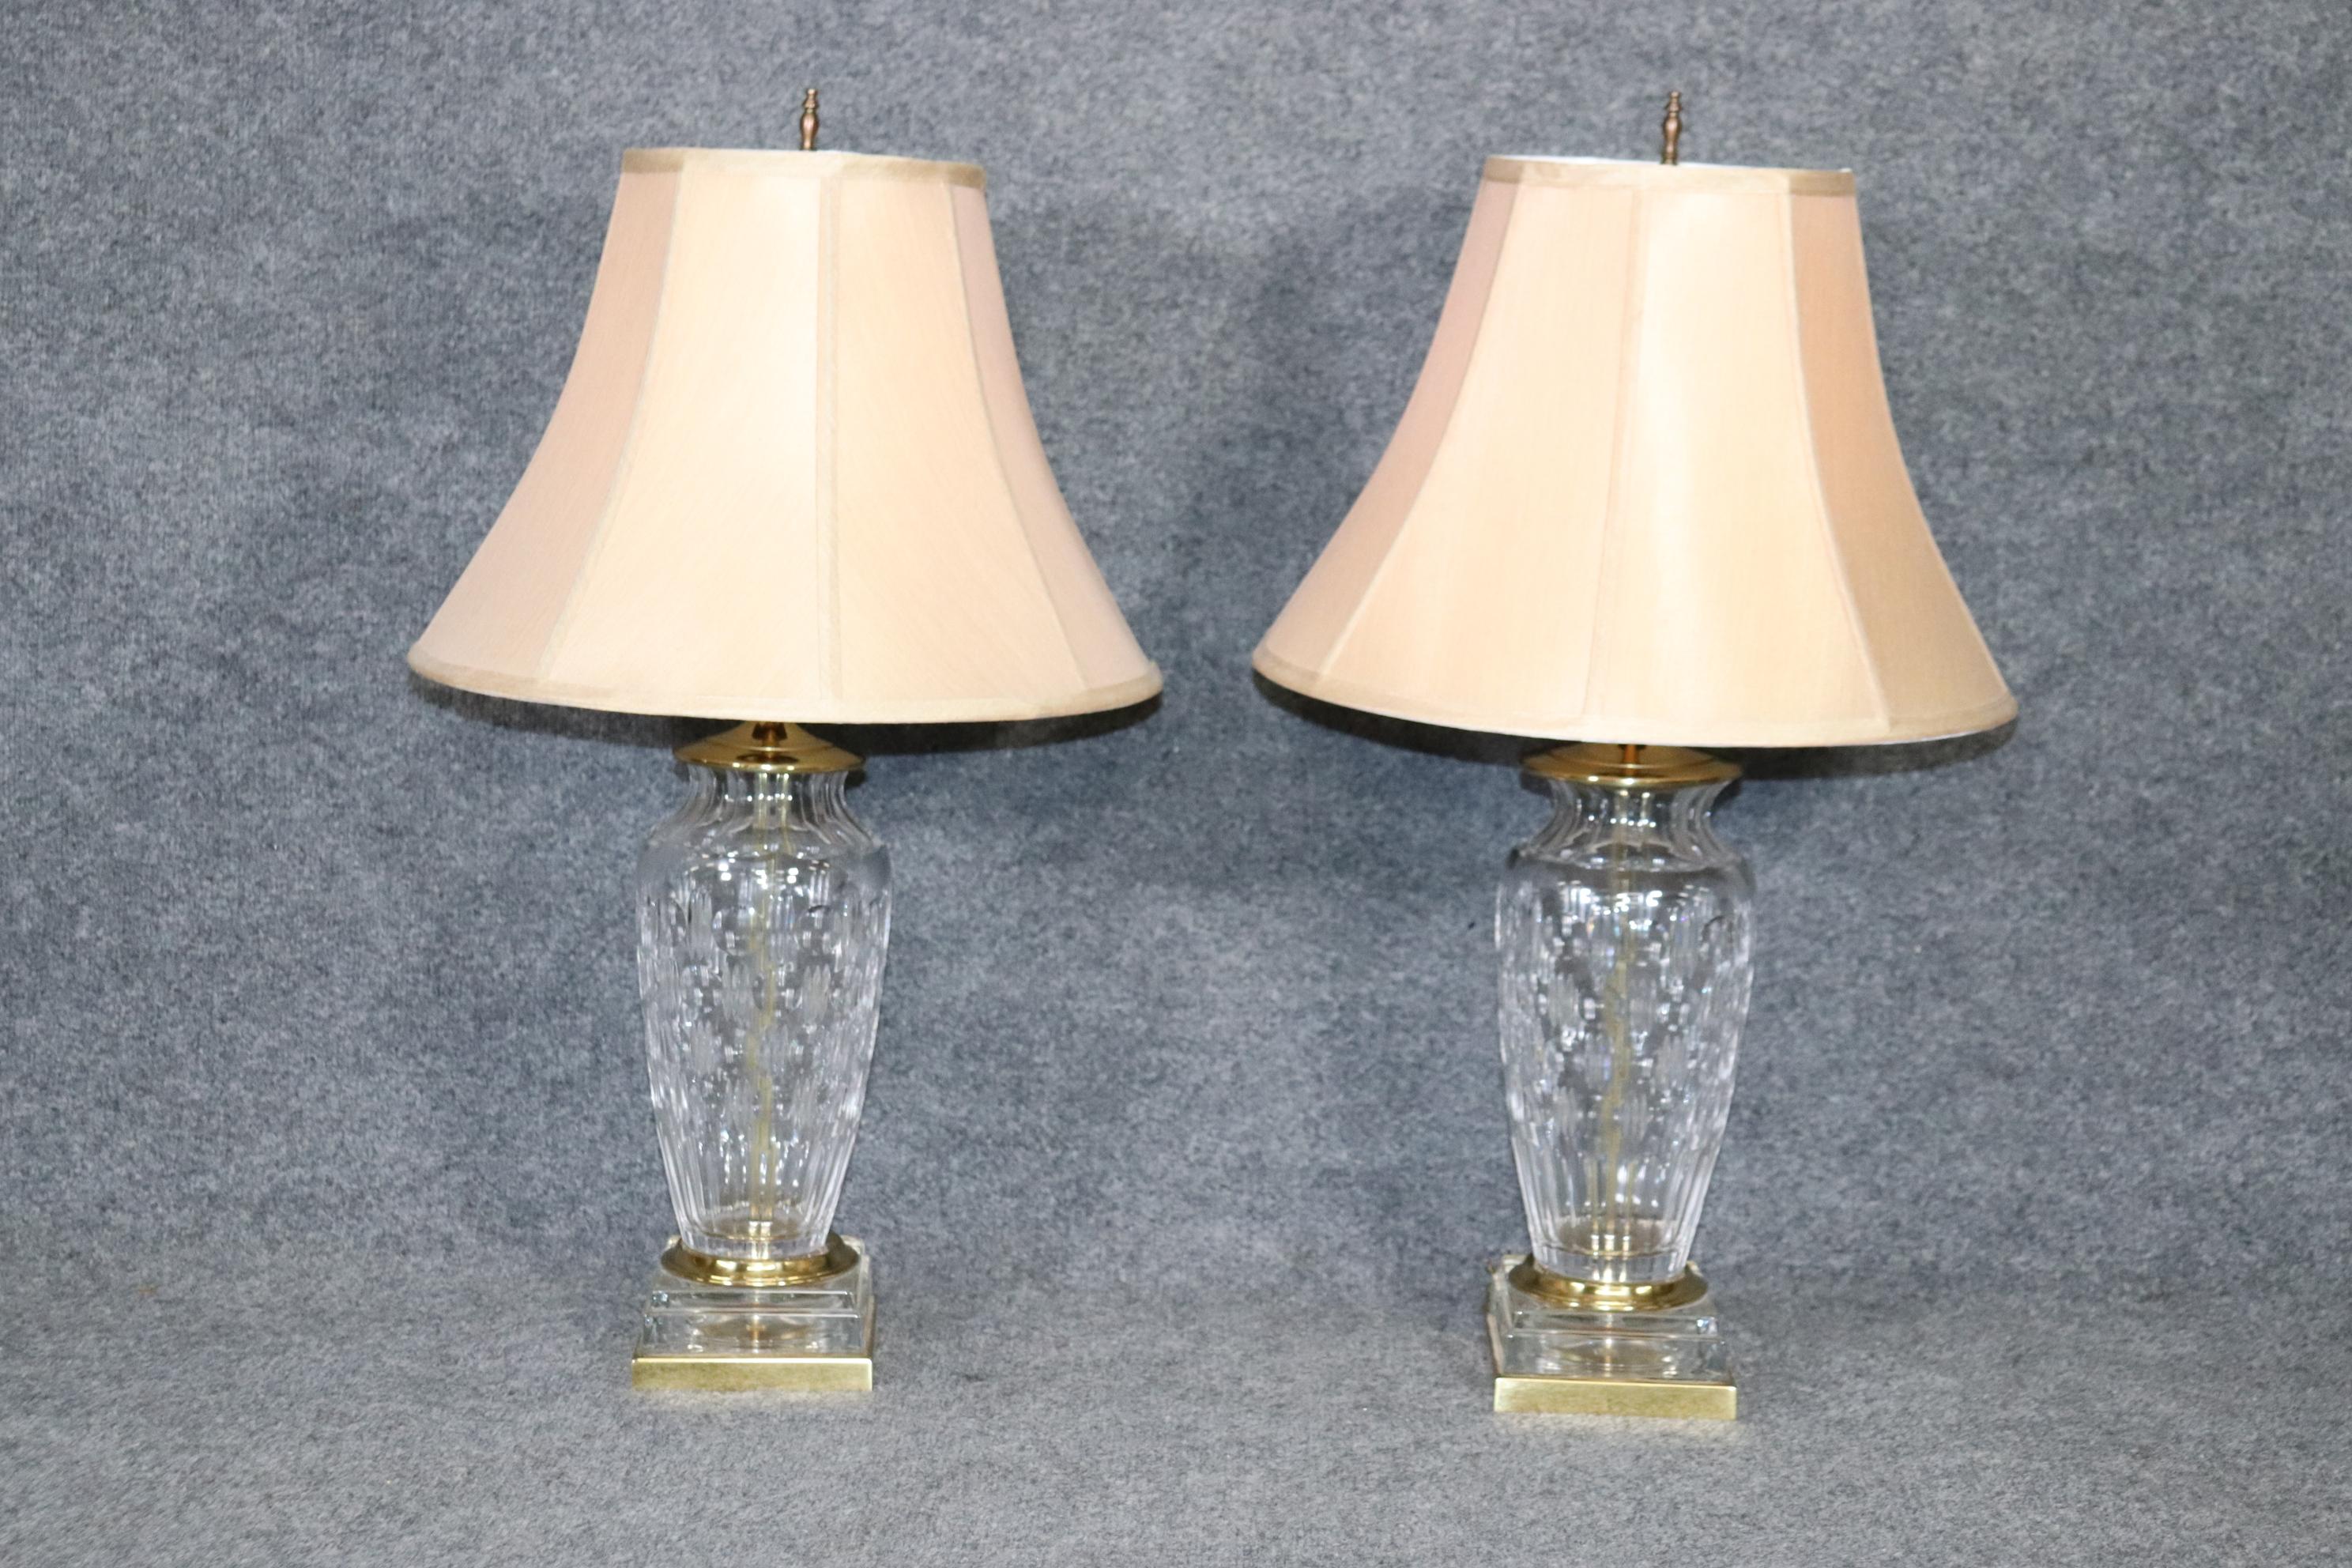 Dimensions- H: 29 1/4in W: 5 3/4in D: 5 3/4in Shade Diameter: 17in
This pair of crystal and brass lamps attributed to waterford are made of the highest quality and are bound to add a nice touch of modernism and minimalistic luxury into your home or